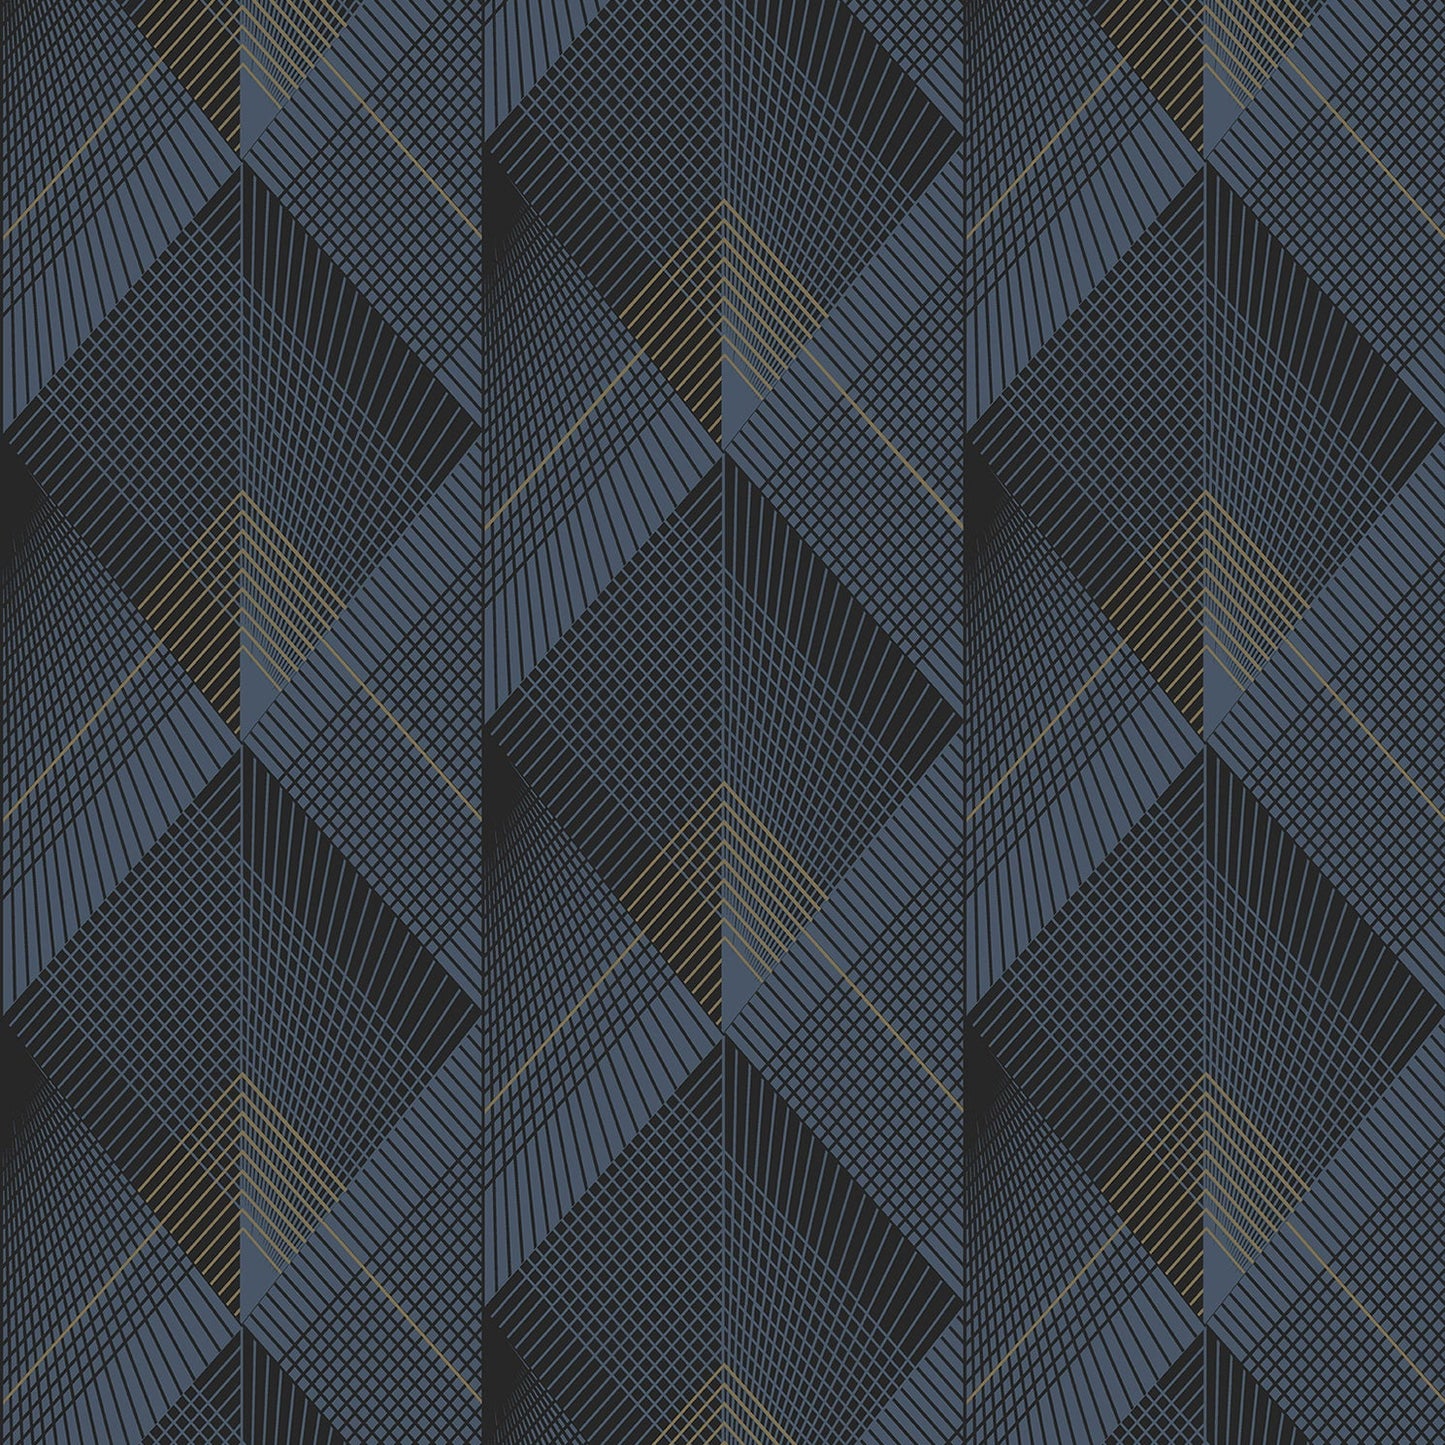 Search 4020-96701 Geo & Textures Raoul Navy Fanning Diamonds Navy by Advantage